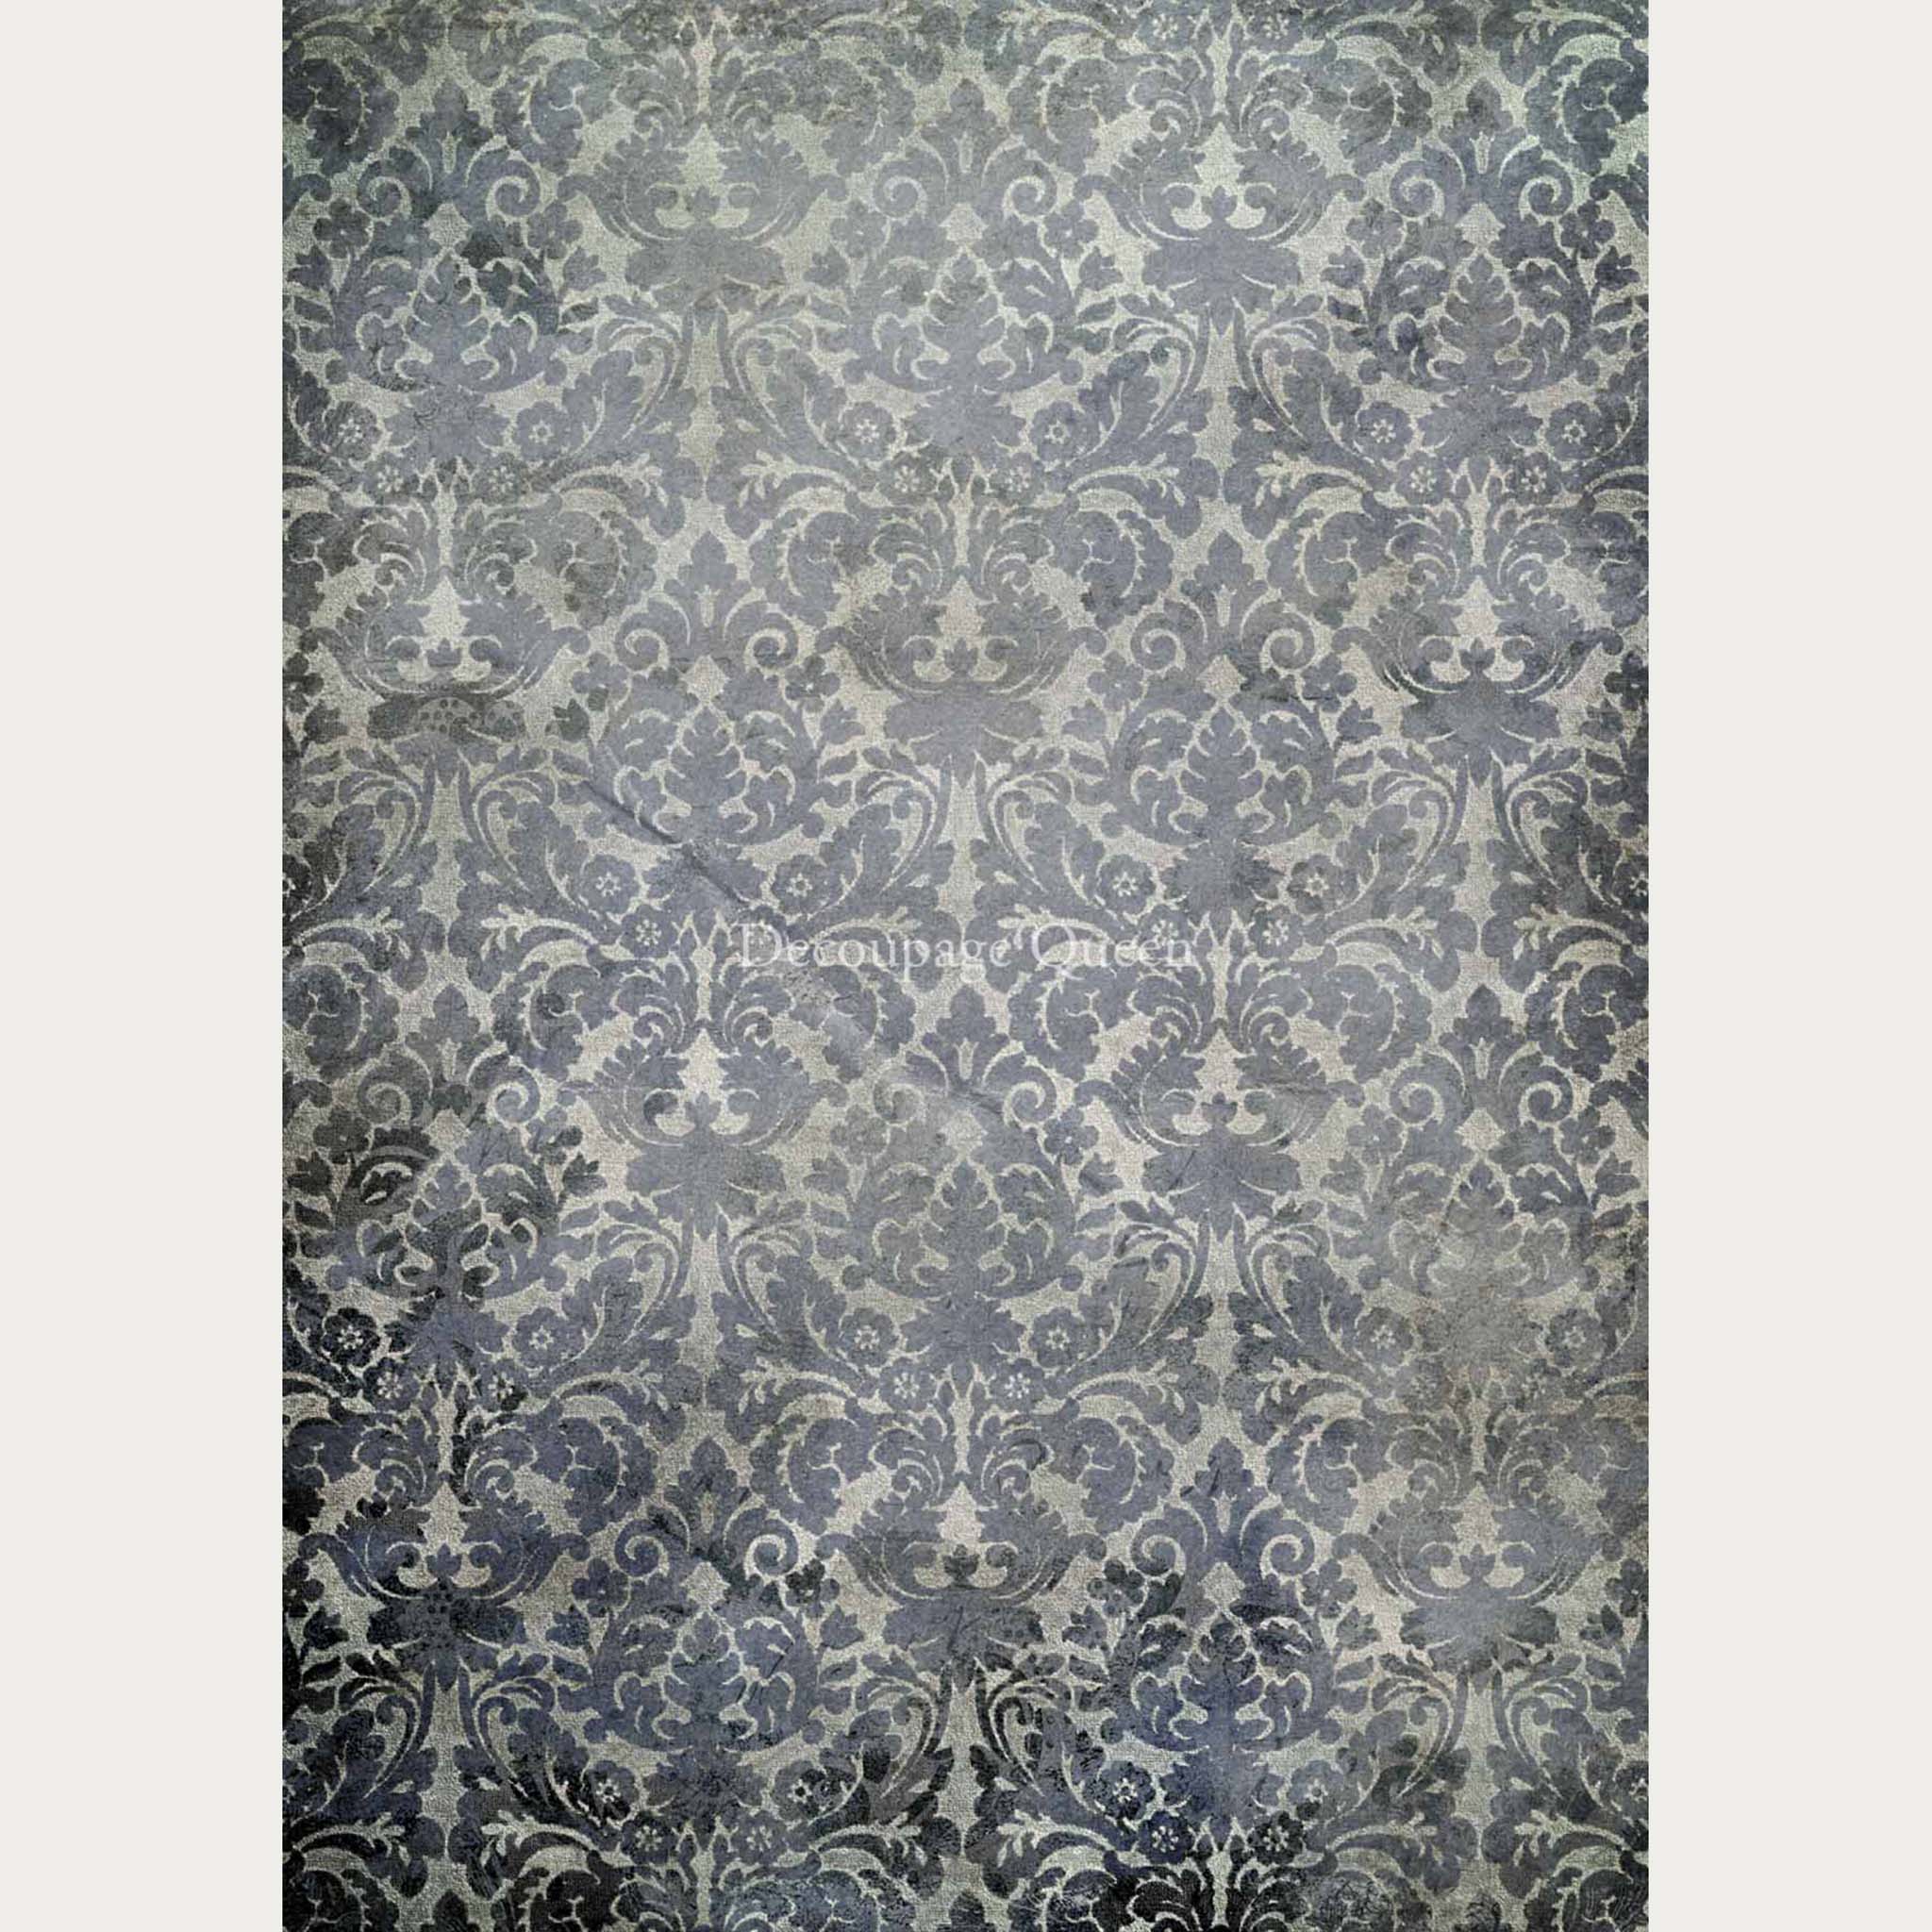 A2 rice paper design that features a faded blue damask wallpaper pattern. White borders are on the sides.